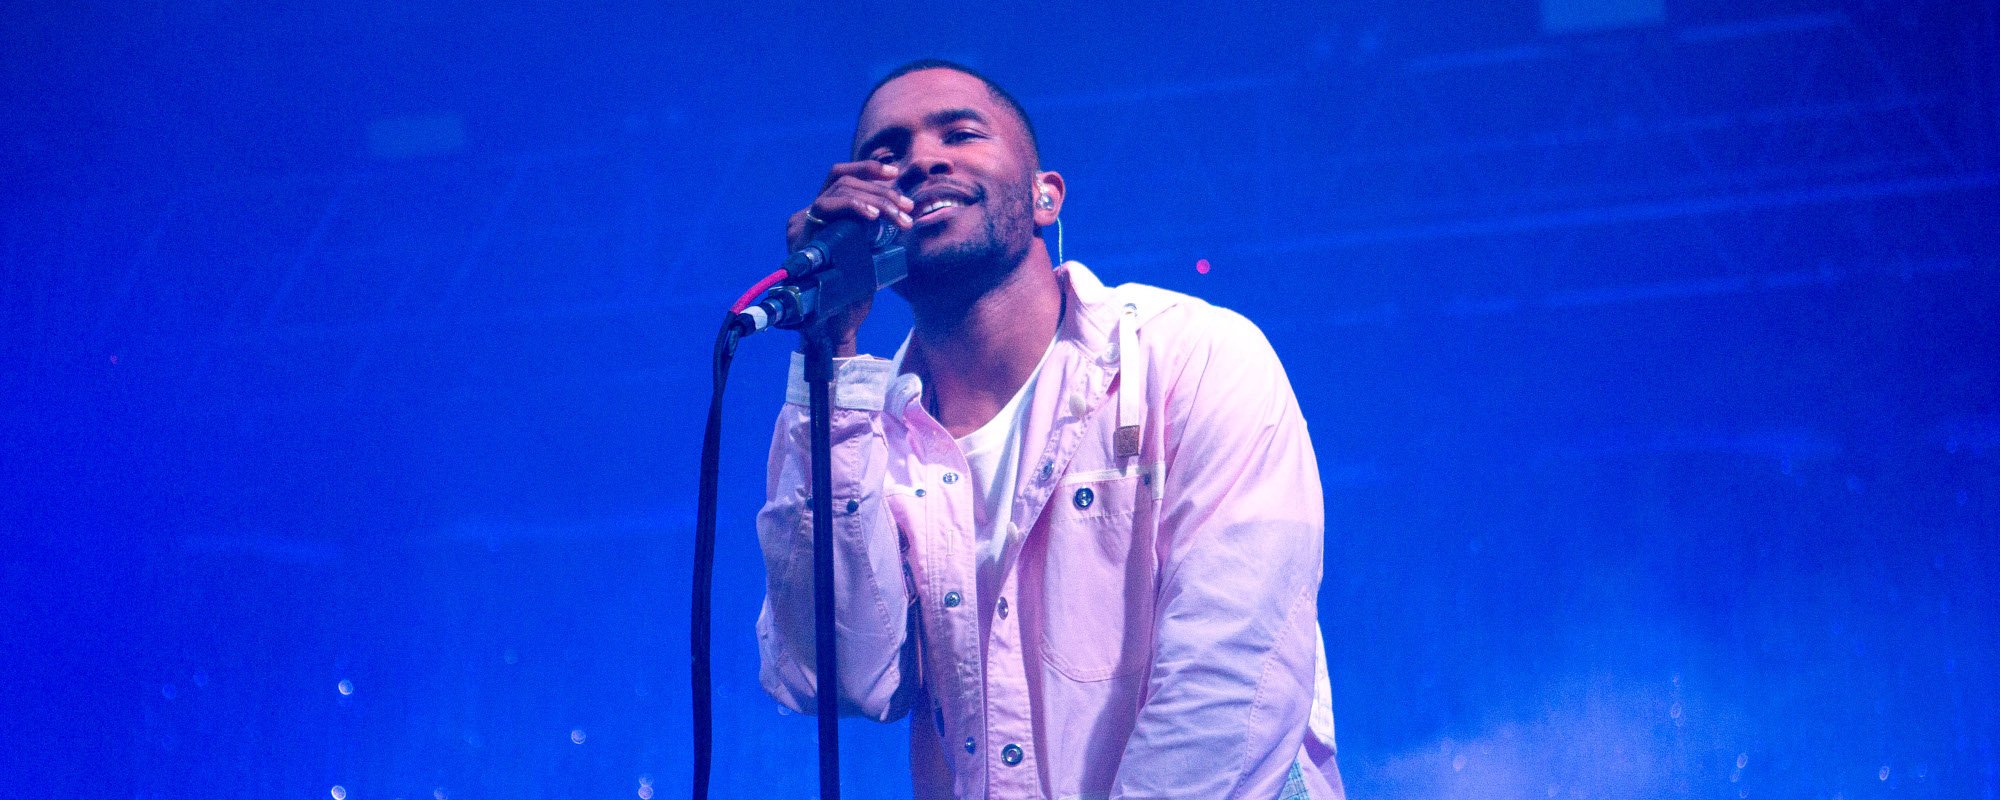 Frank Ocean Fans Tricked Into Buying AI-Generated Songs Passing as Leaks